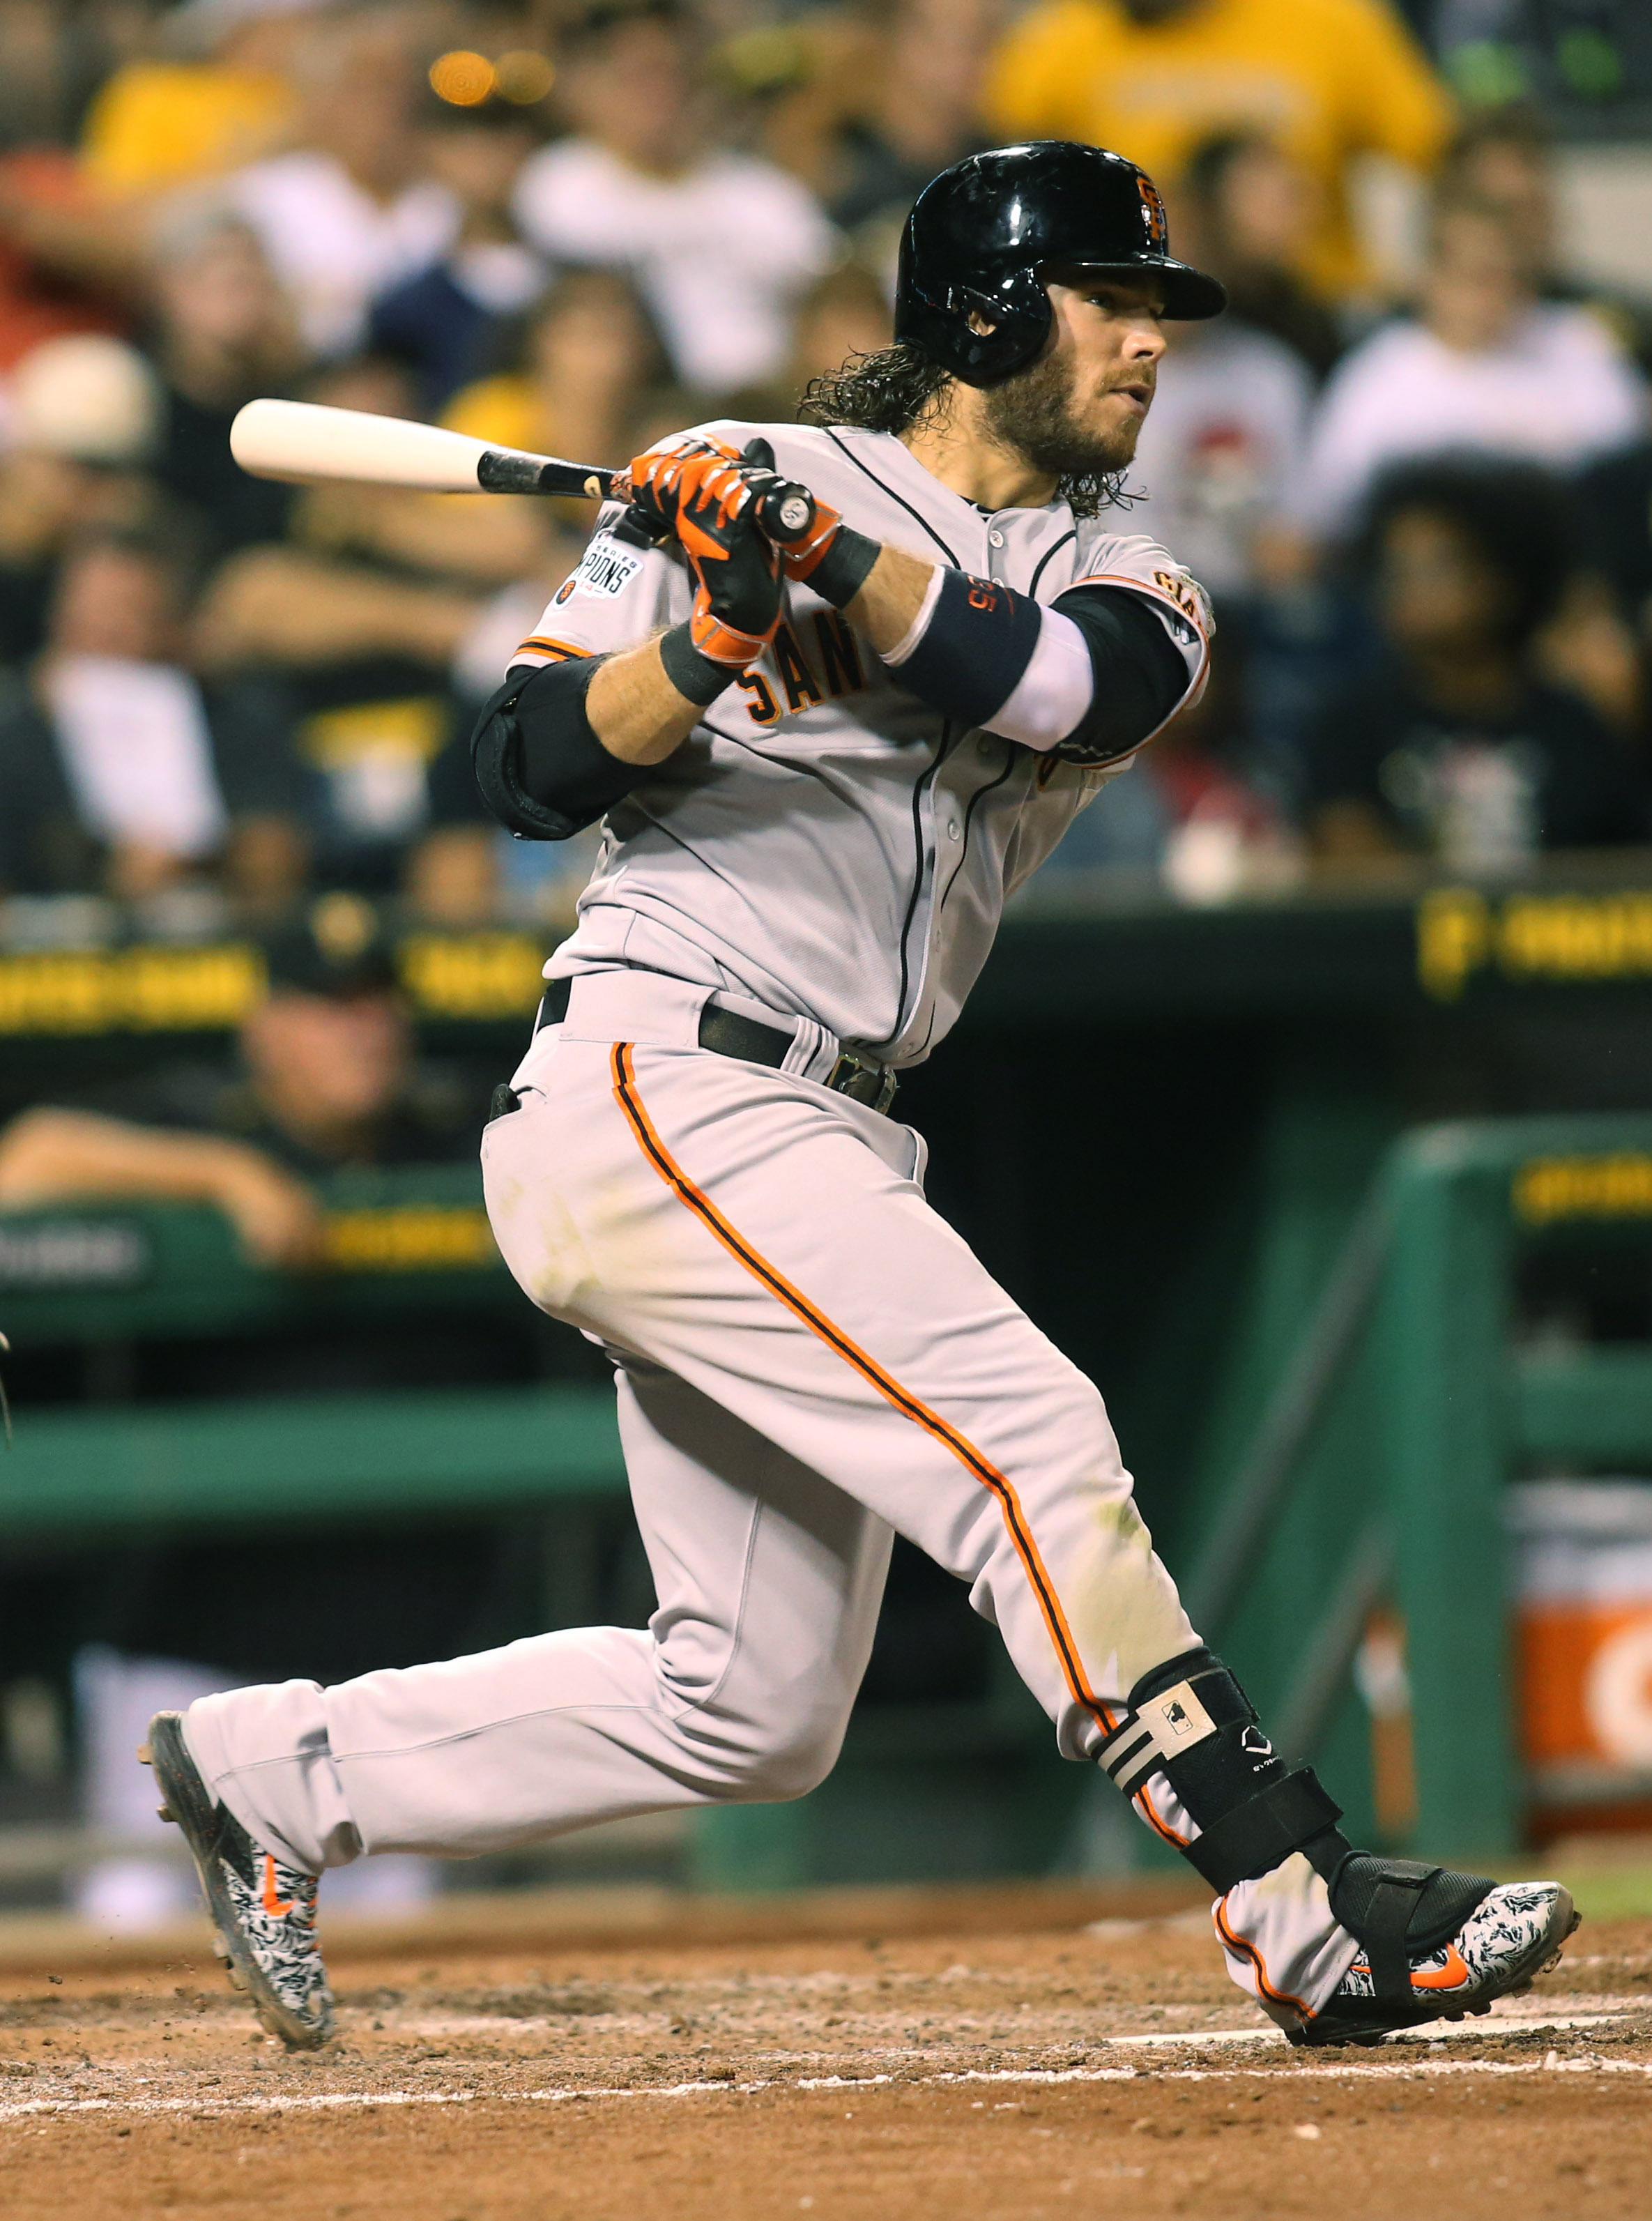 Brandon Crawford had a breakout season on a disappointing Giants team. Can he repeat the feat?